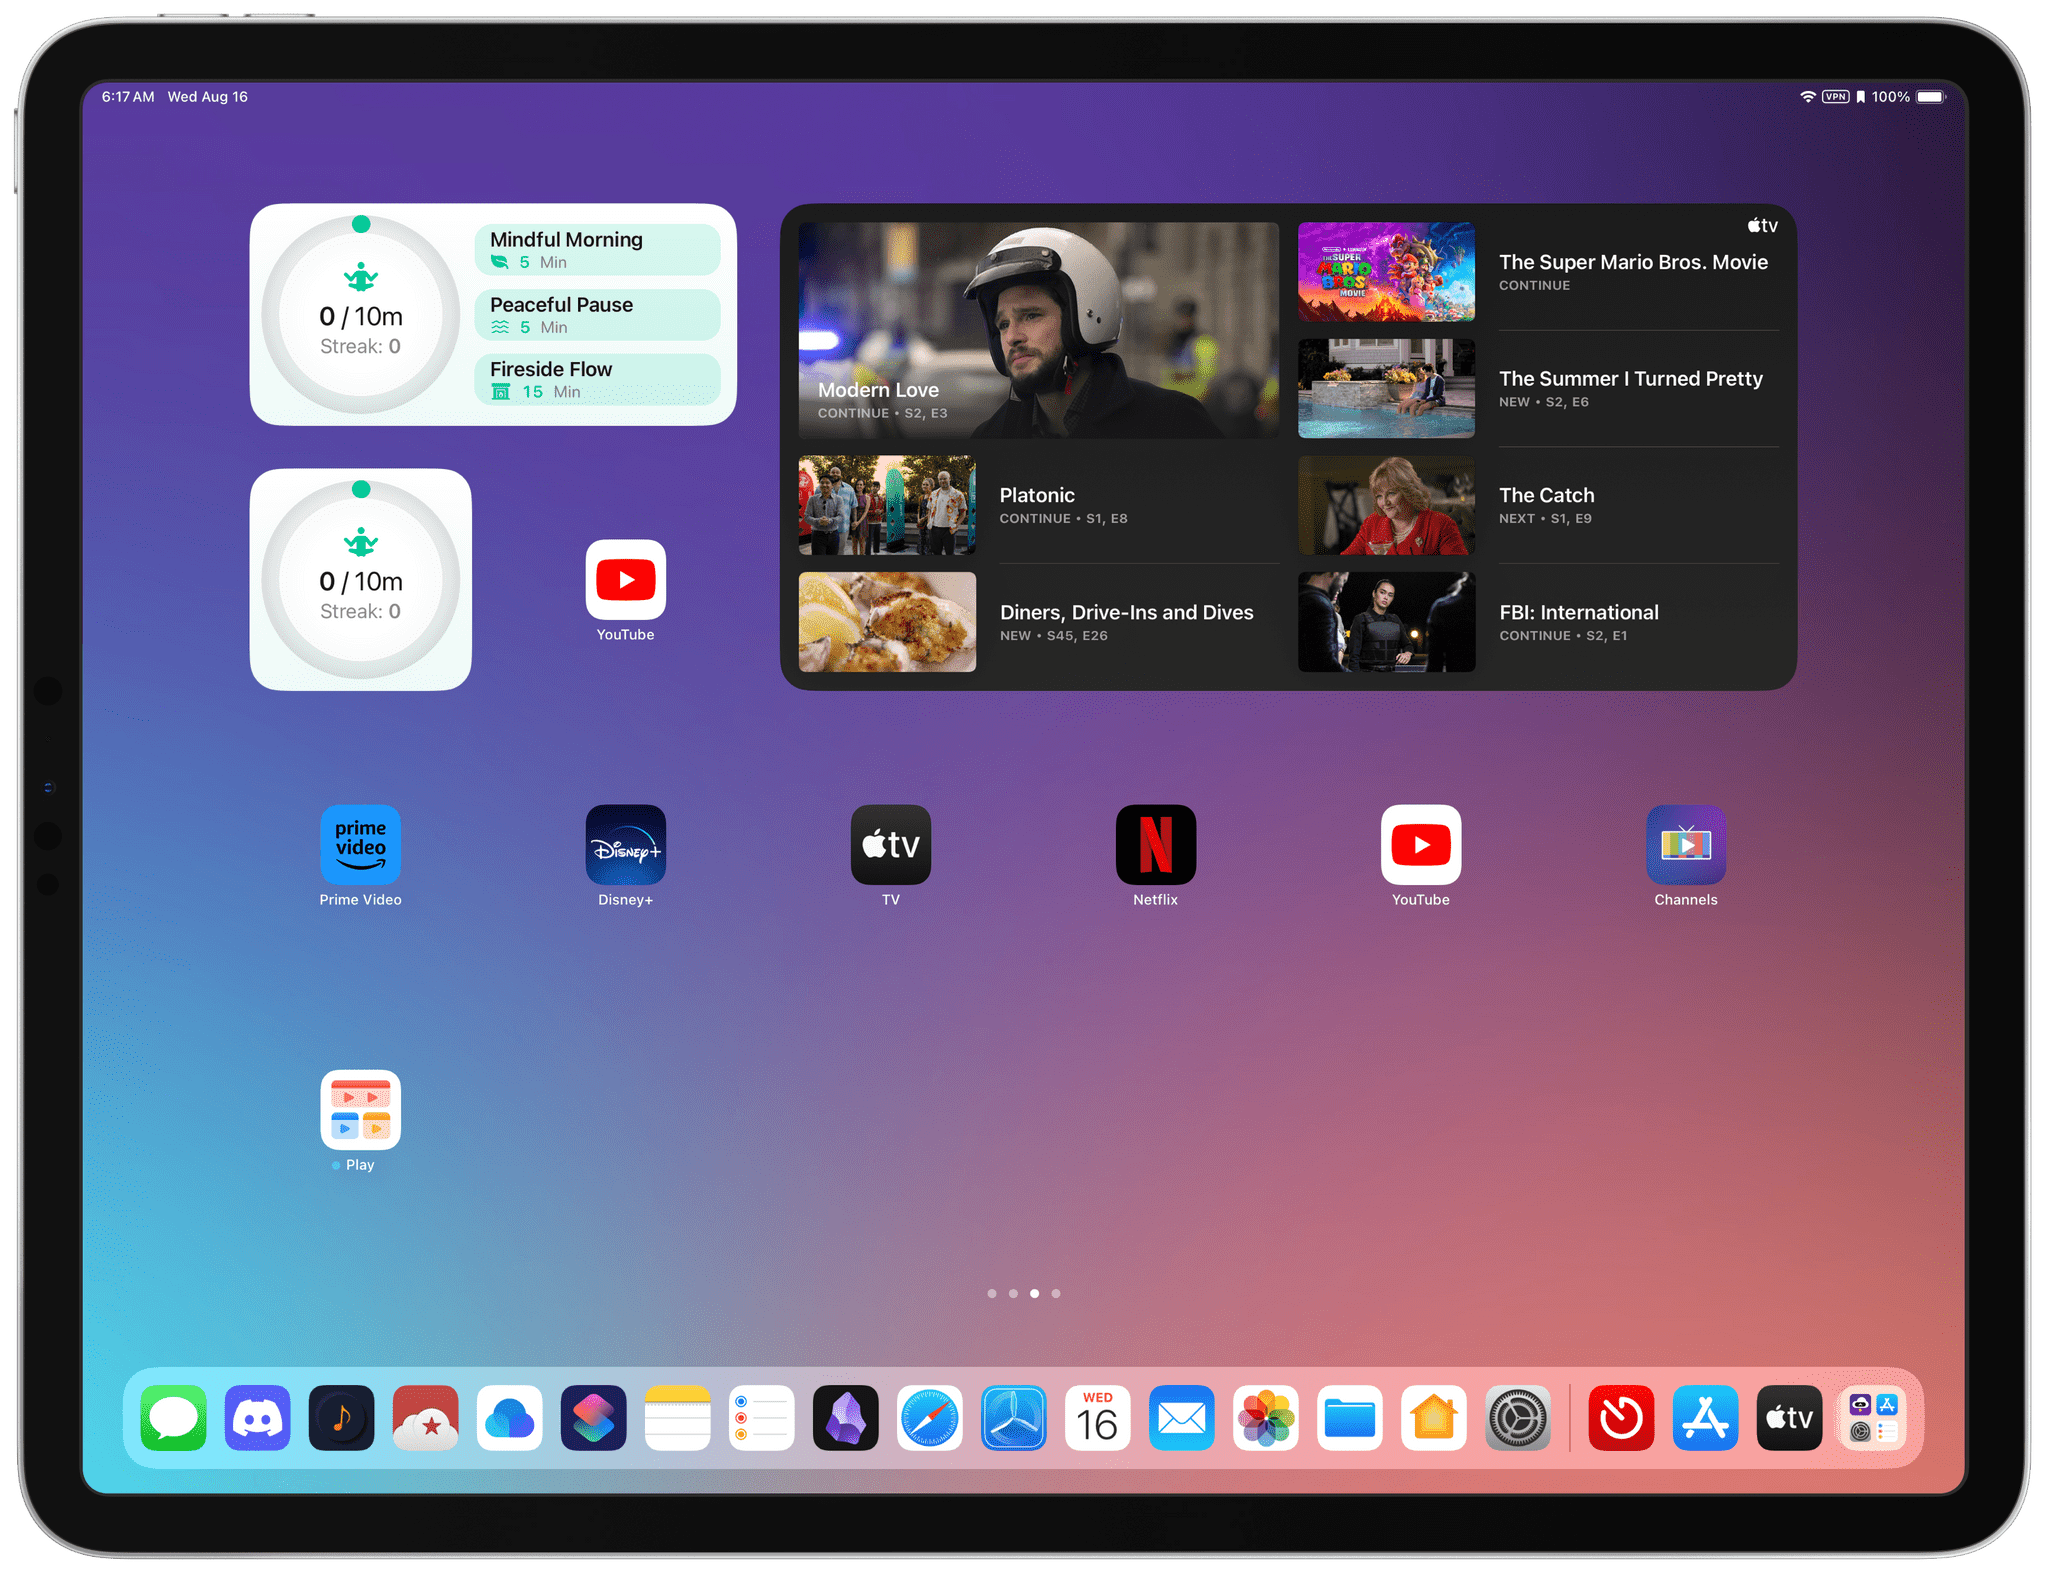 I'd love to see more Home Screen widget options, including interactivity when iOS and iPadOS 17 are released.